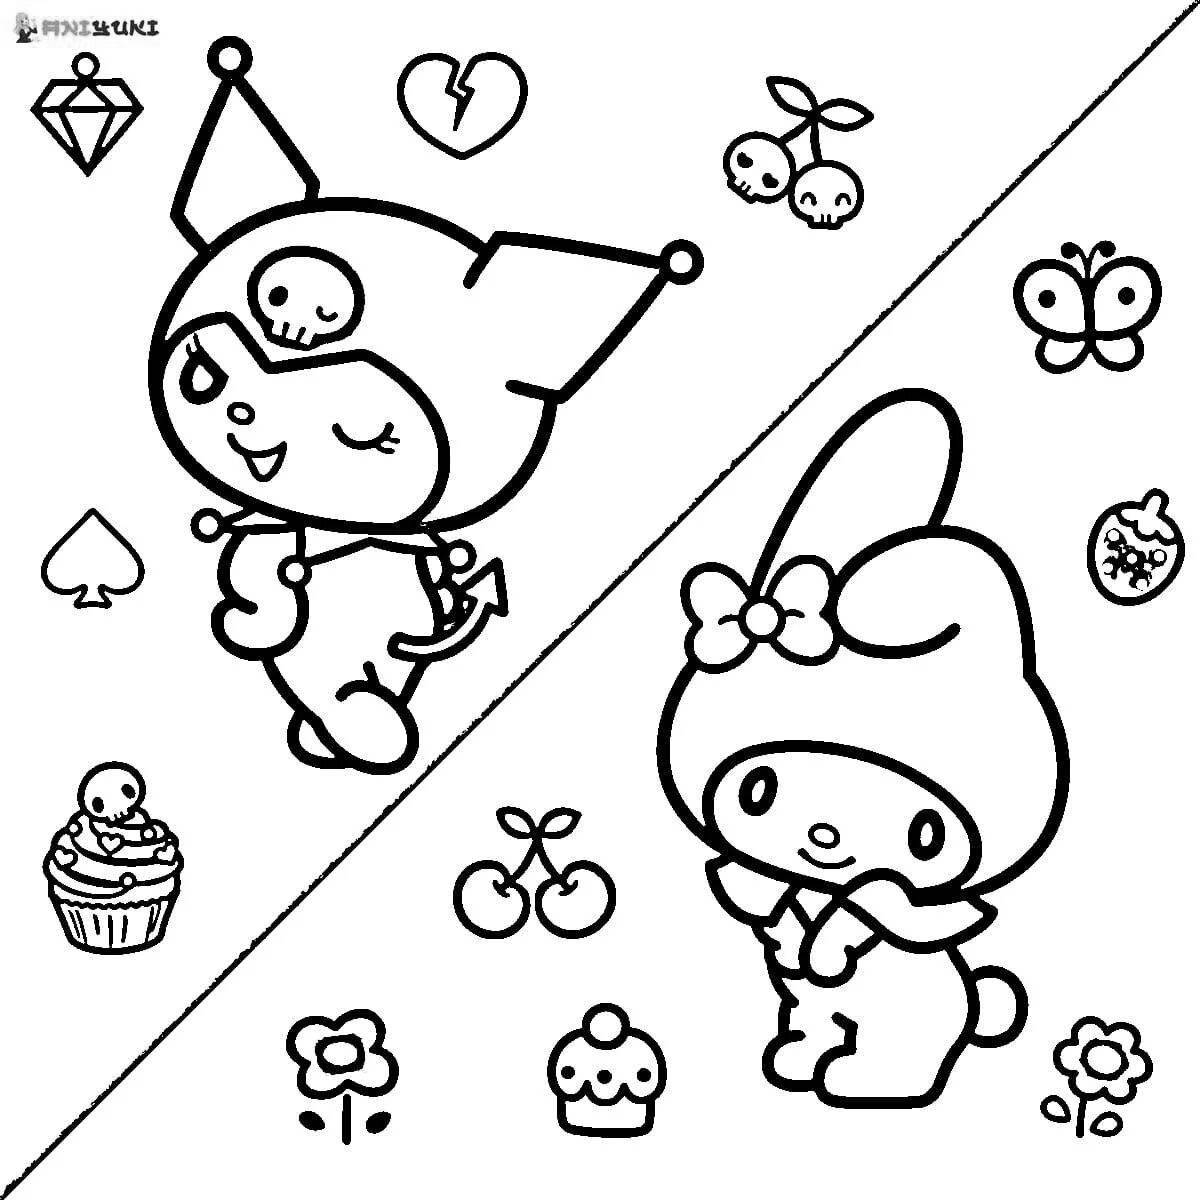 Pretty may melody hello kitty coloring book